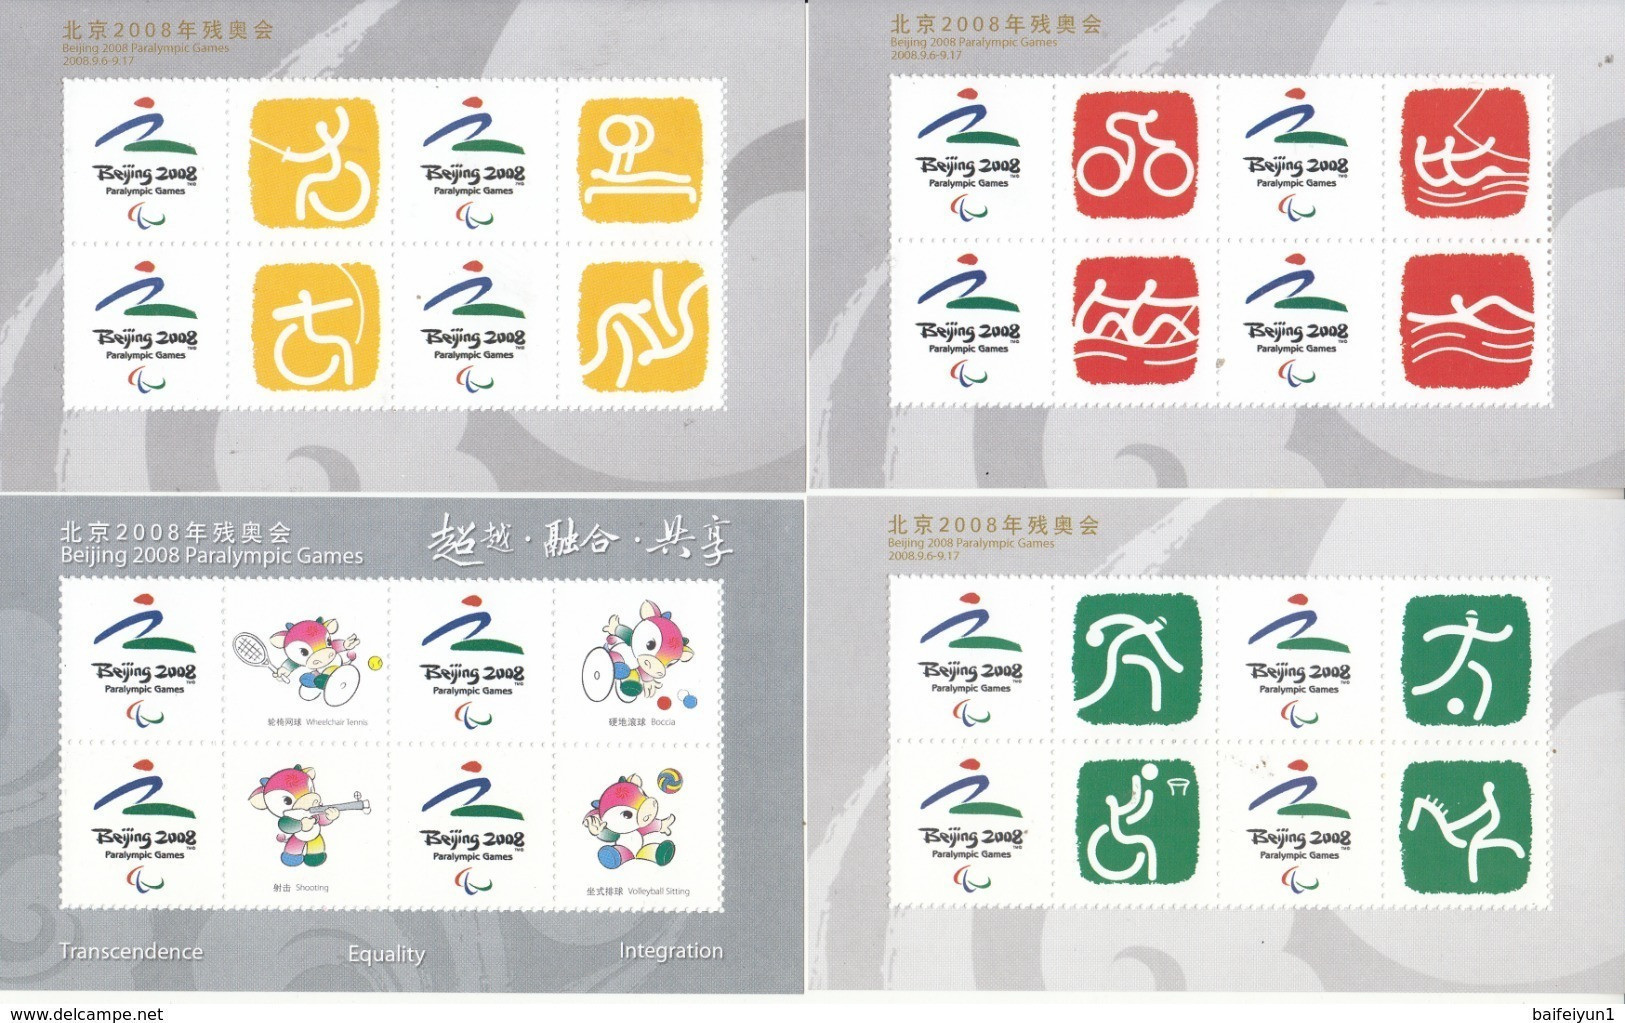 China 2008 Beijing 2008 Paralympic Games Special Sheets - Ete 2008: Pékin